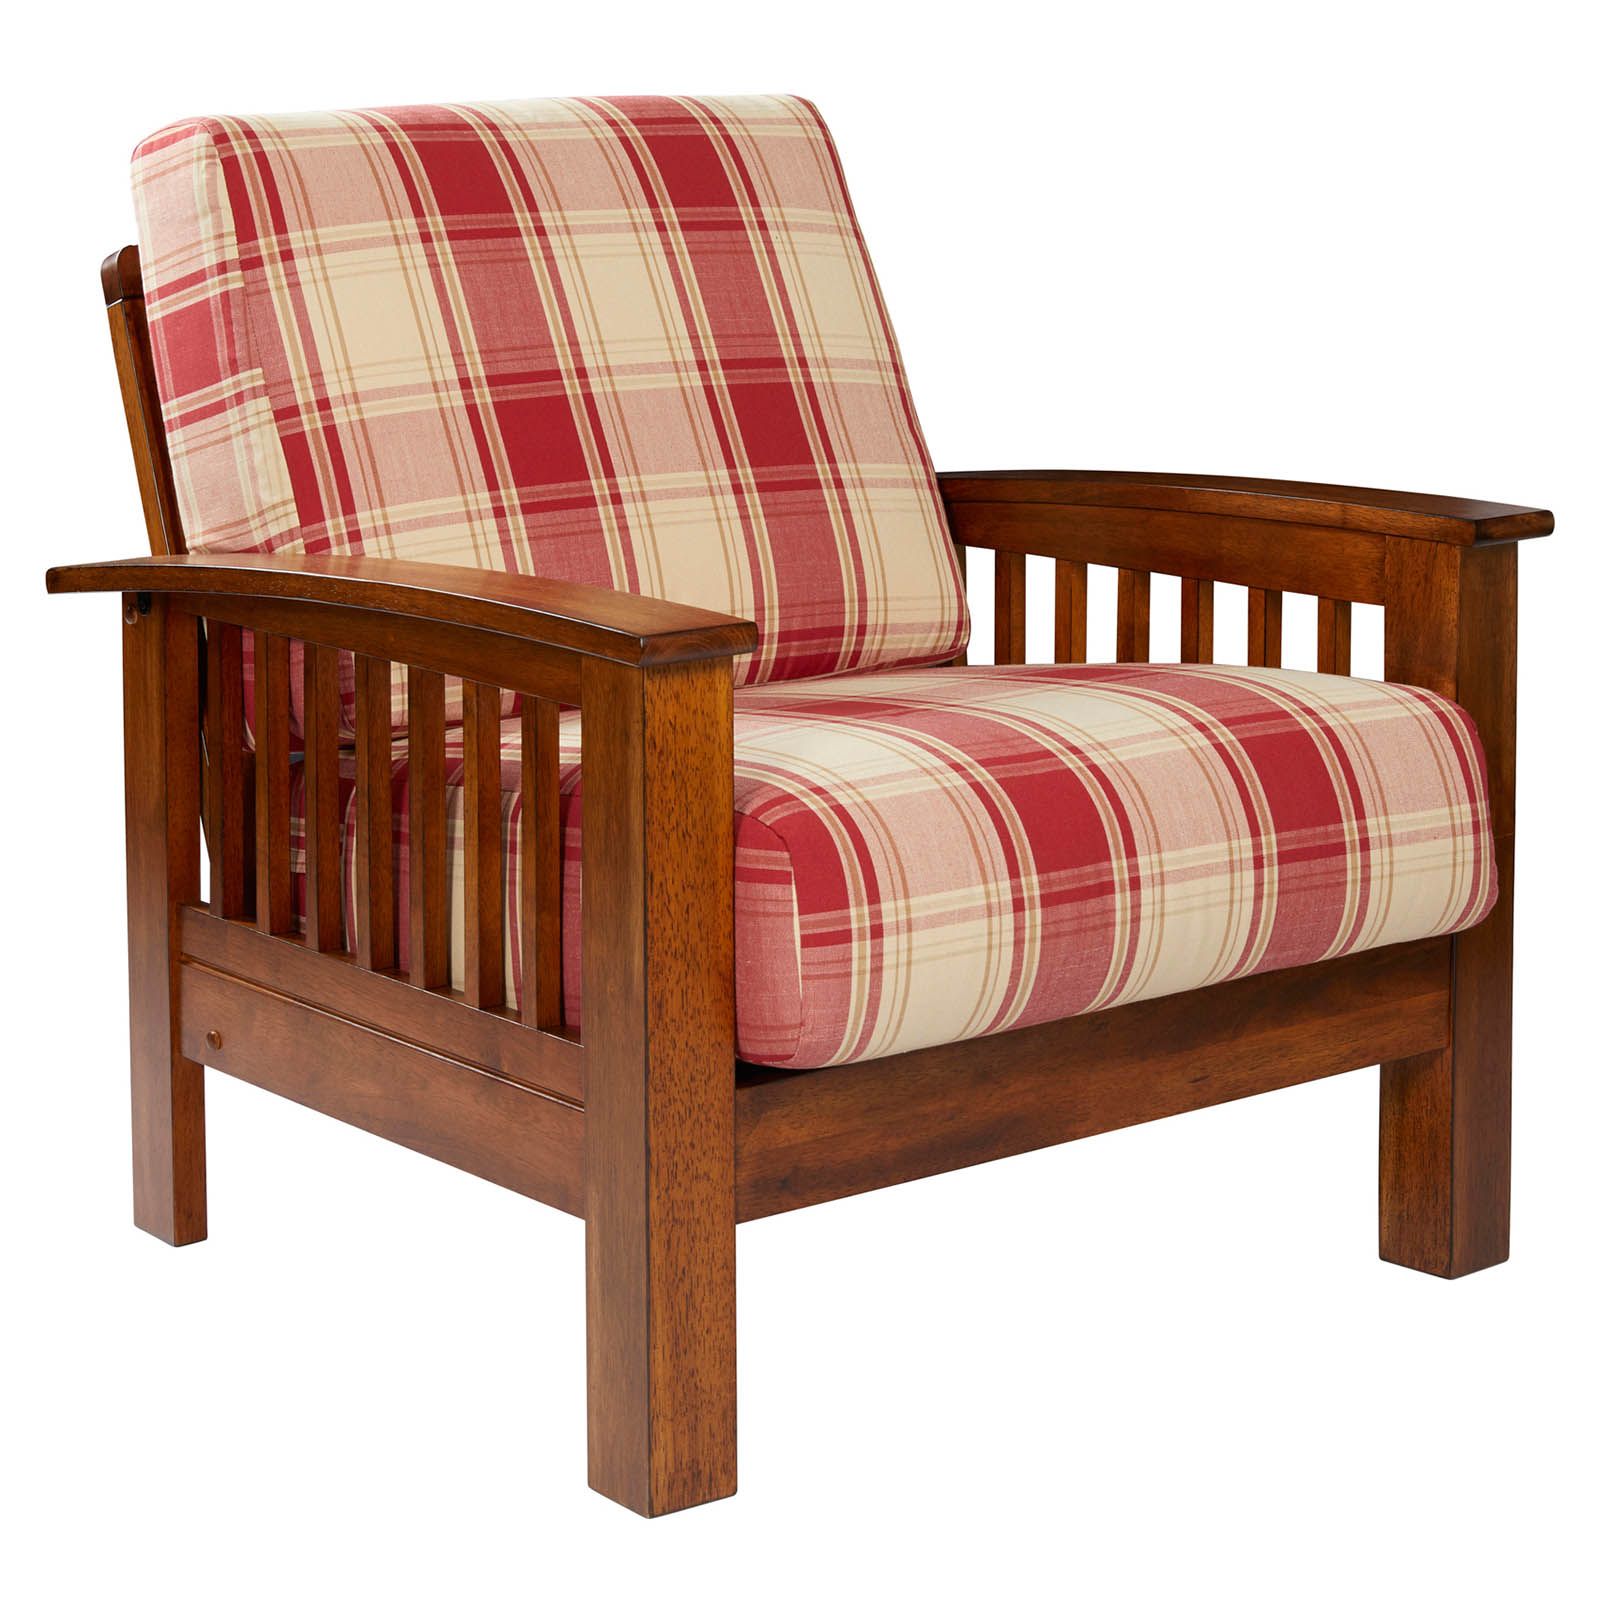 Handy Living Omaha Mission Style Wood Arm Chair Red Plaid Bjs